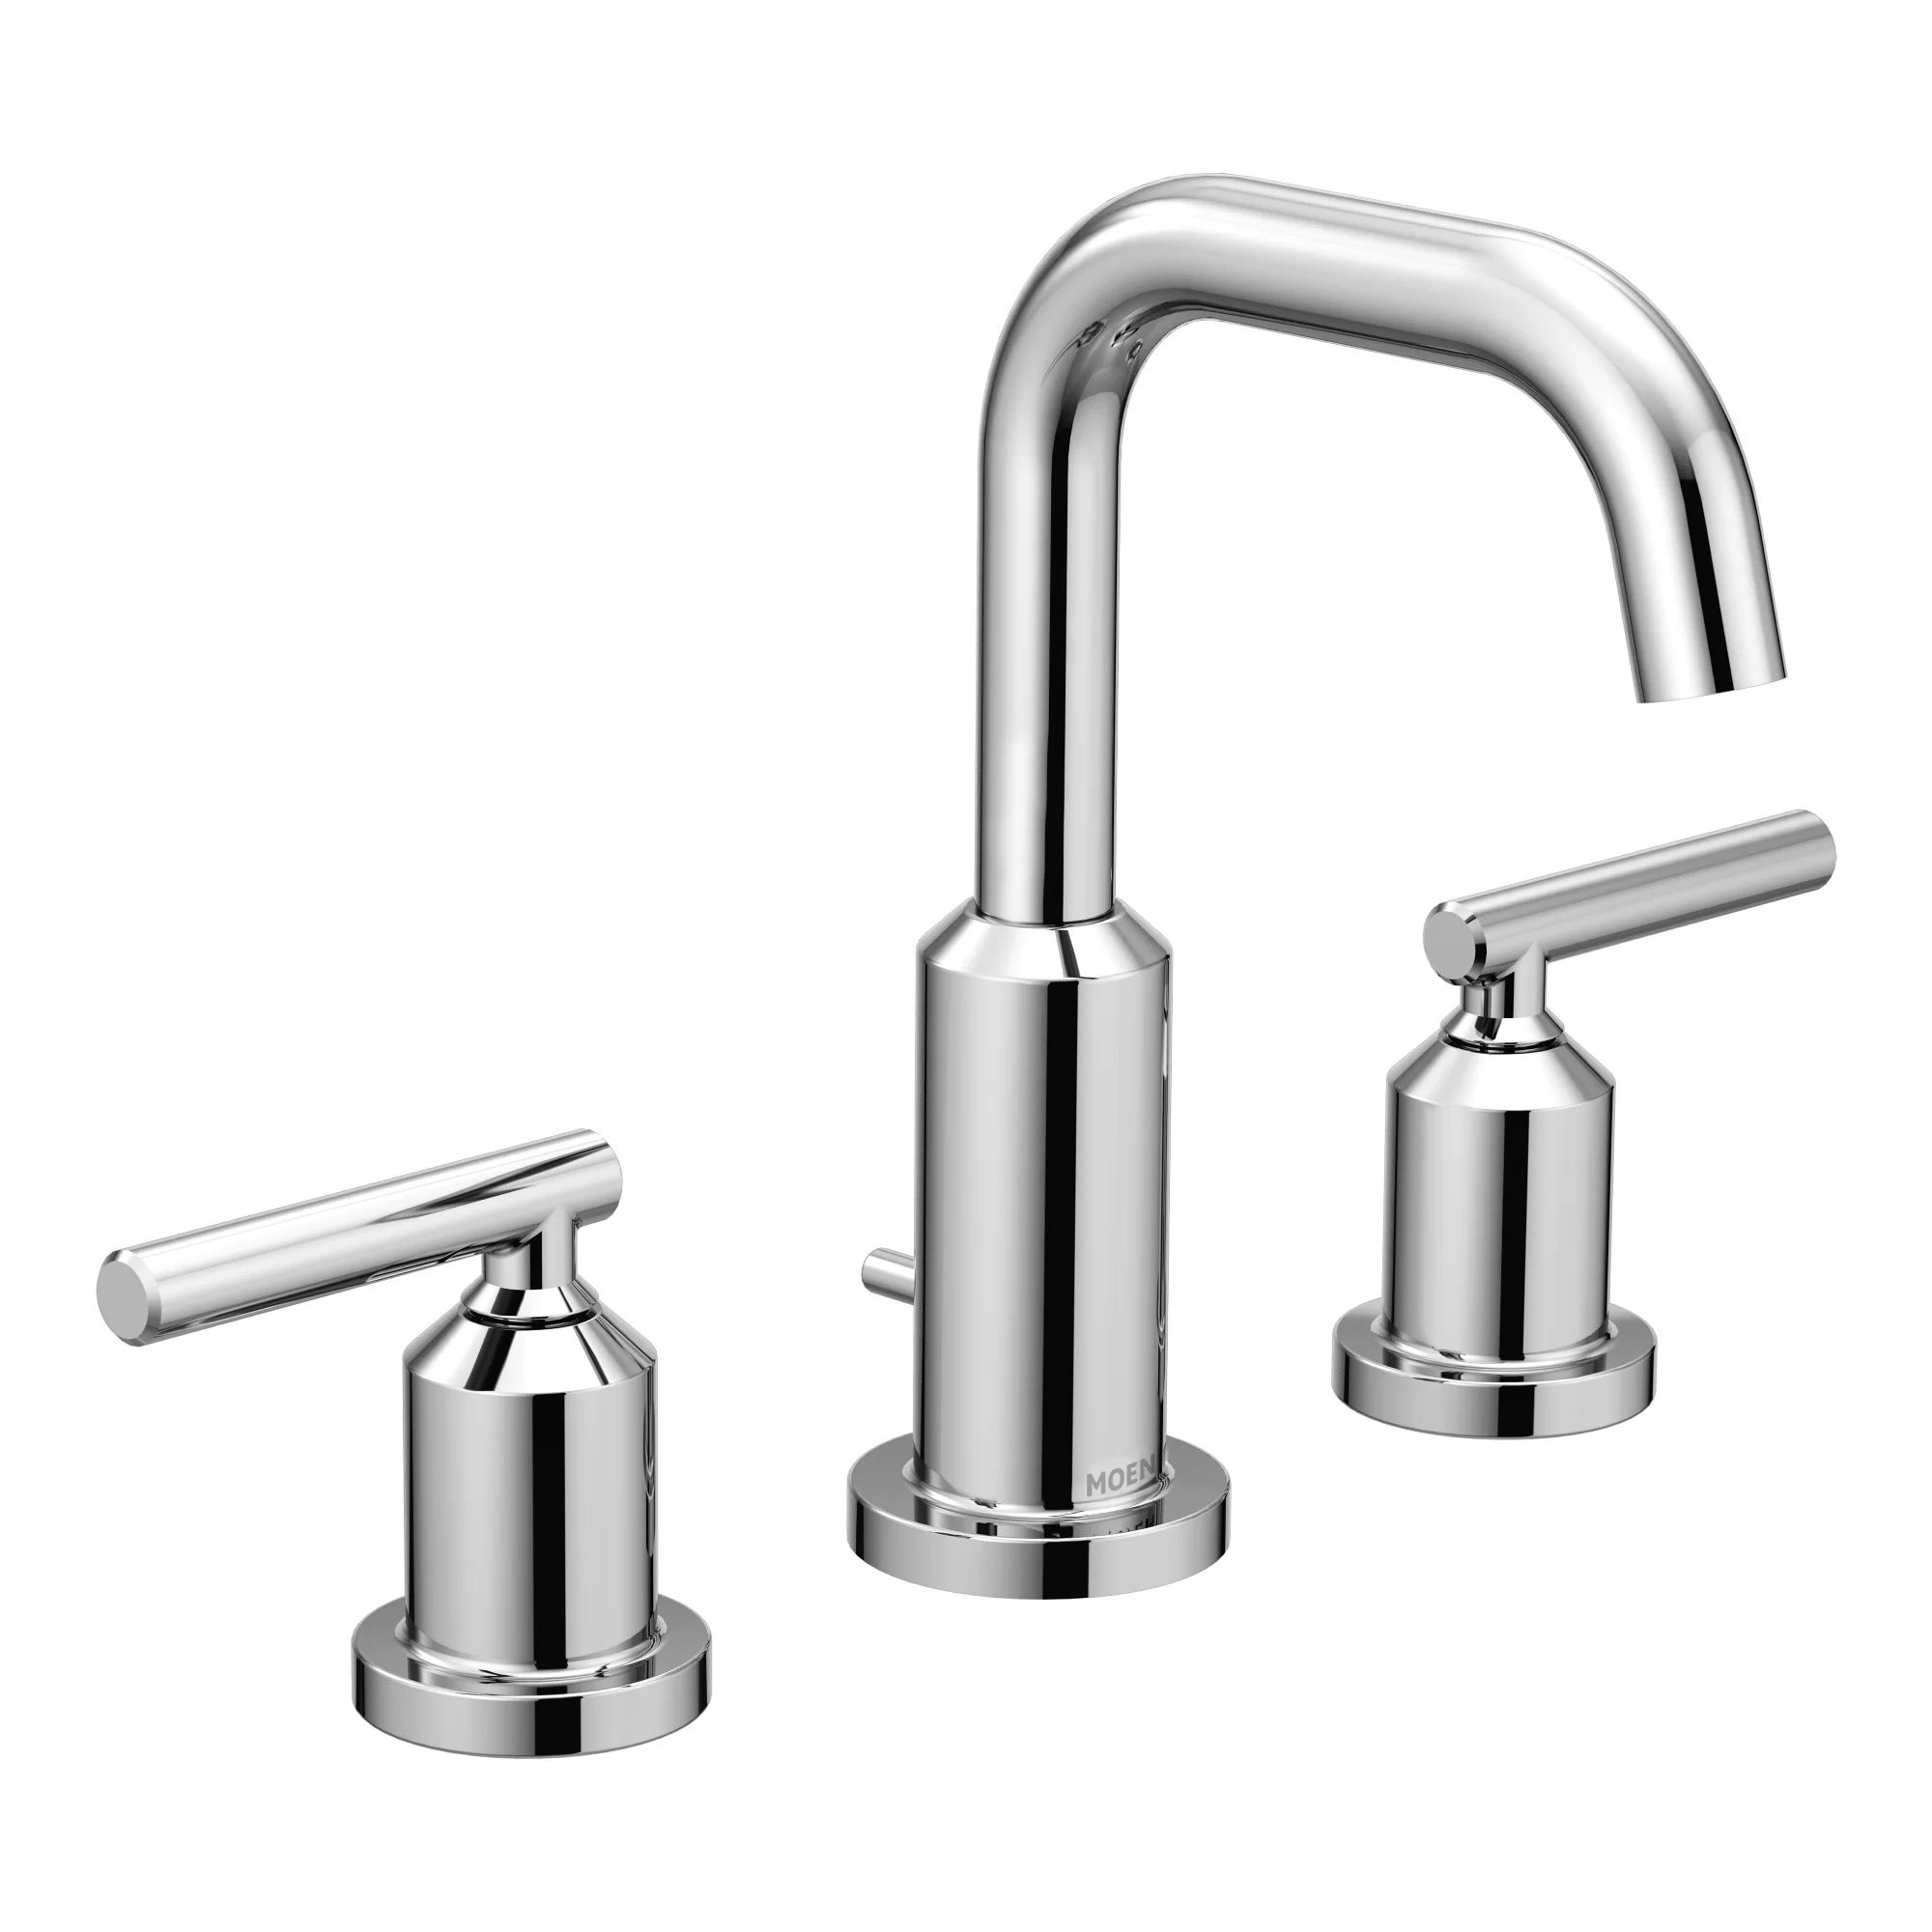 Chrome Gibson Widespread Bathroom Faucet (Part number: T6142) | Wayfair North America